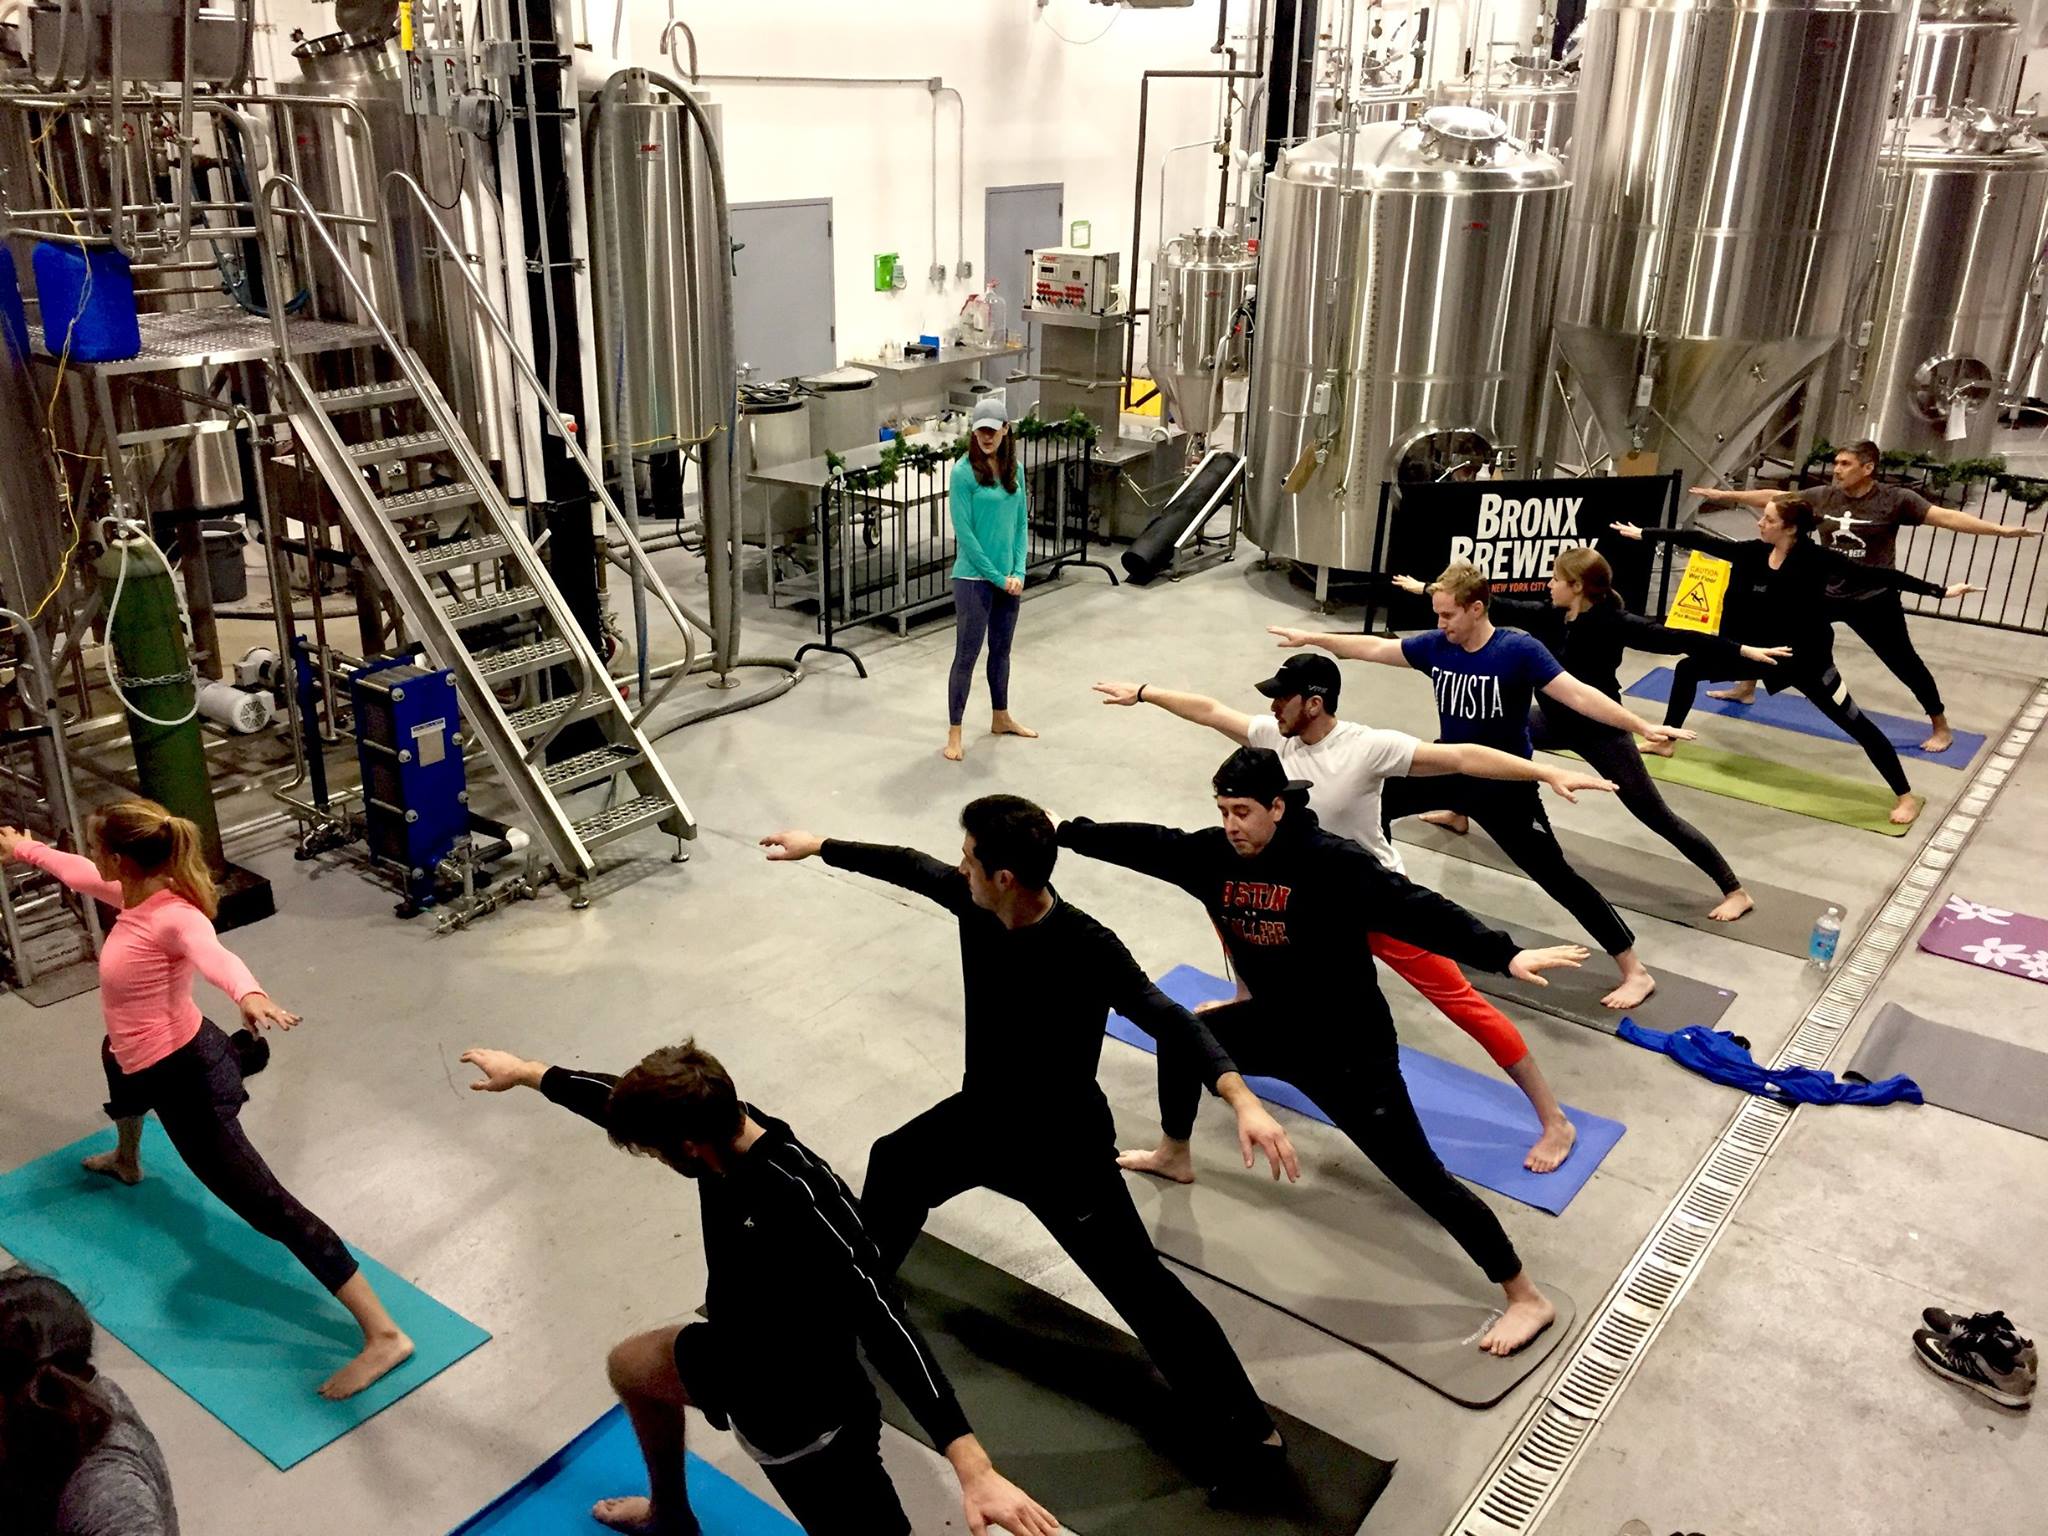 A yoga class in the Brew room at The Bronx Brewery